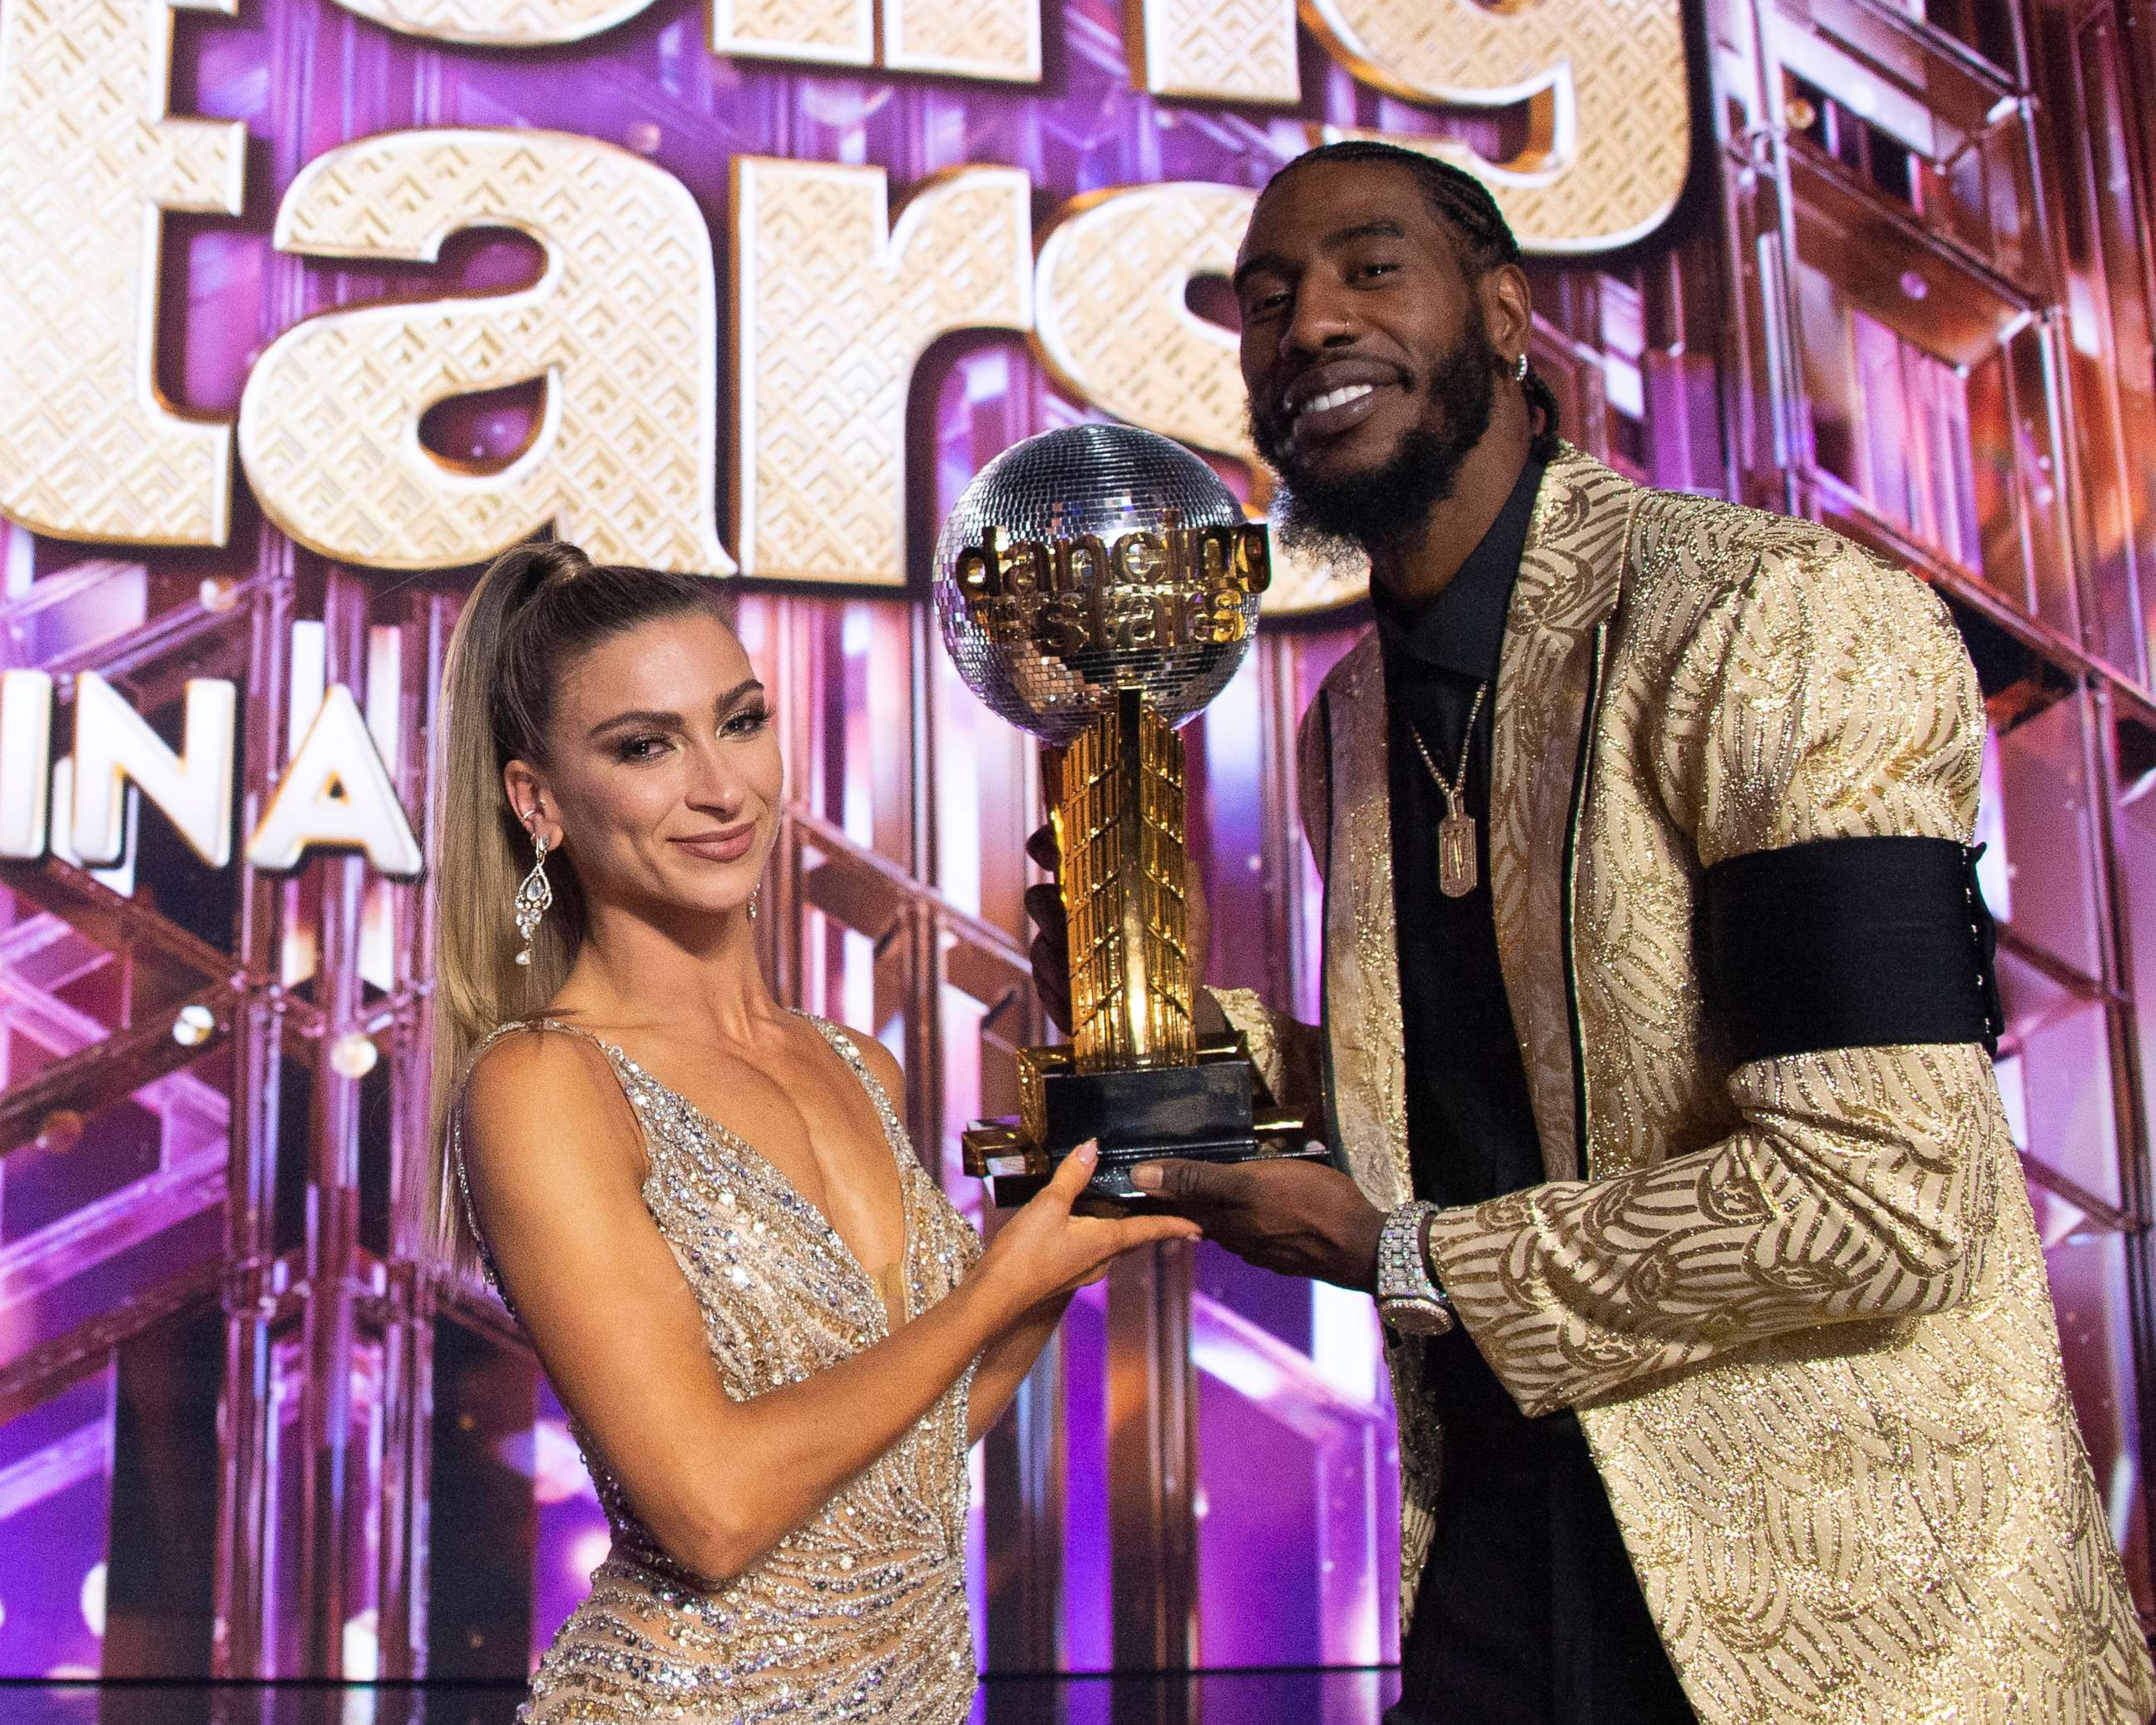 PHOTO: Daniella Karagach and Iman Shumpert hold the Mirrorball Trophy on "Dancing with the Stars," Nov. 22, 2021.